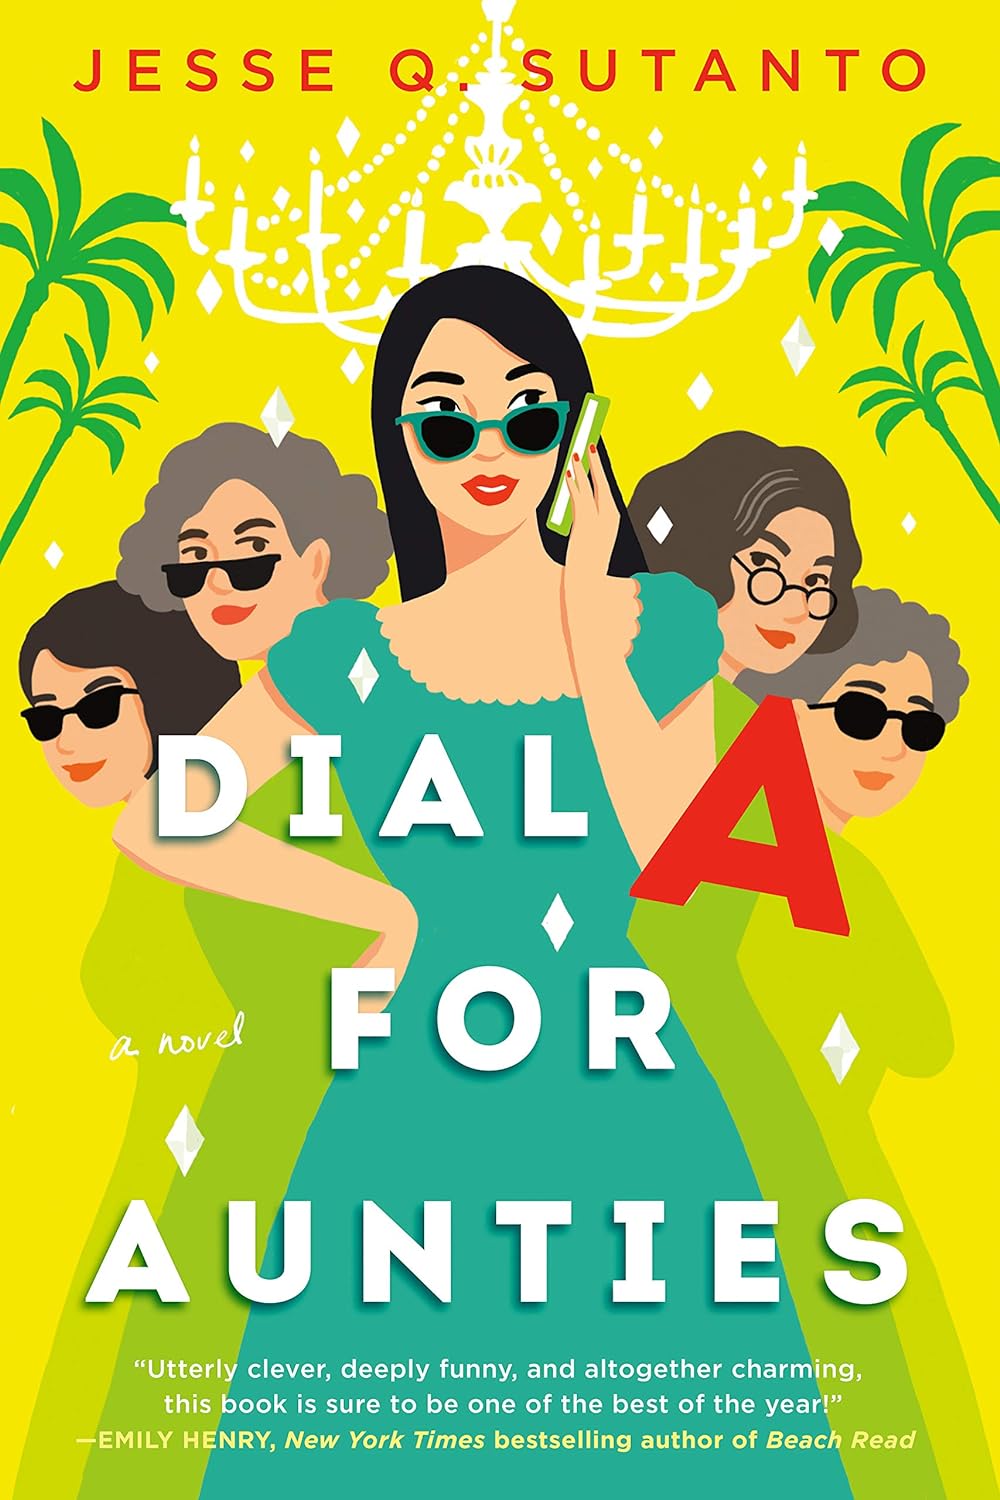 Book cover shows 5 women against a bright yellow backdrop